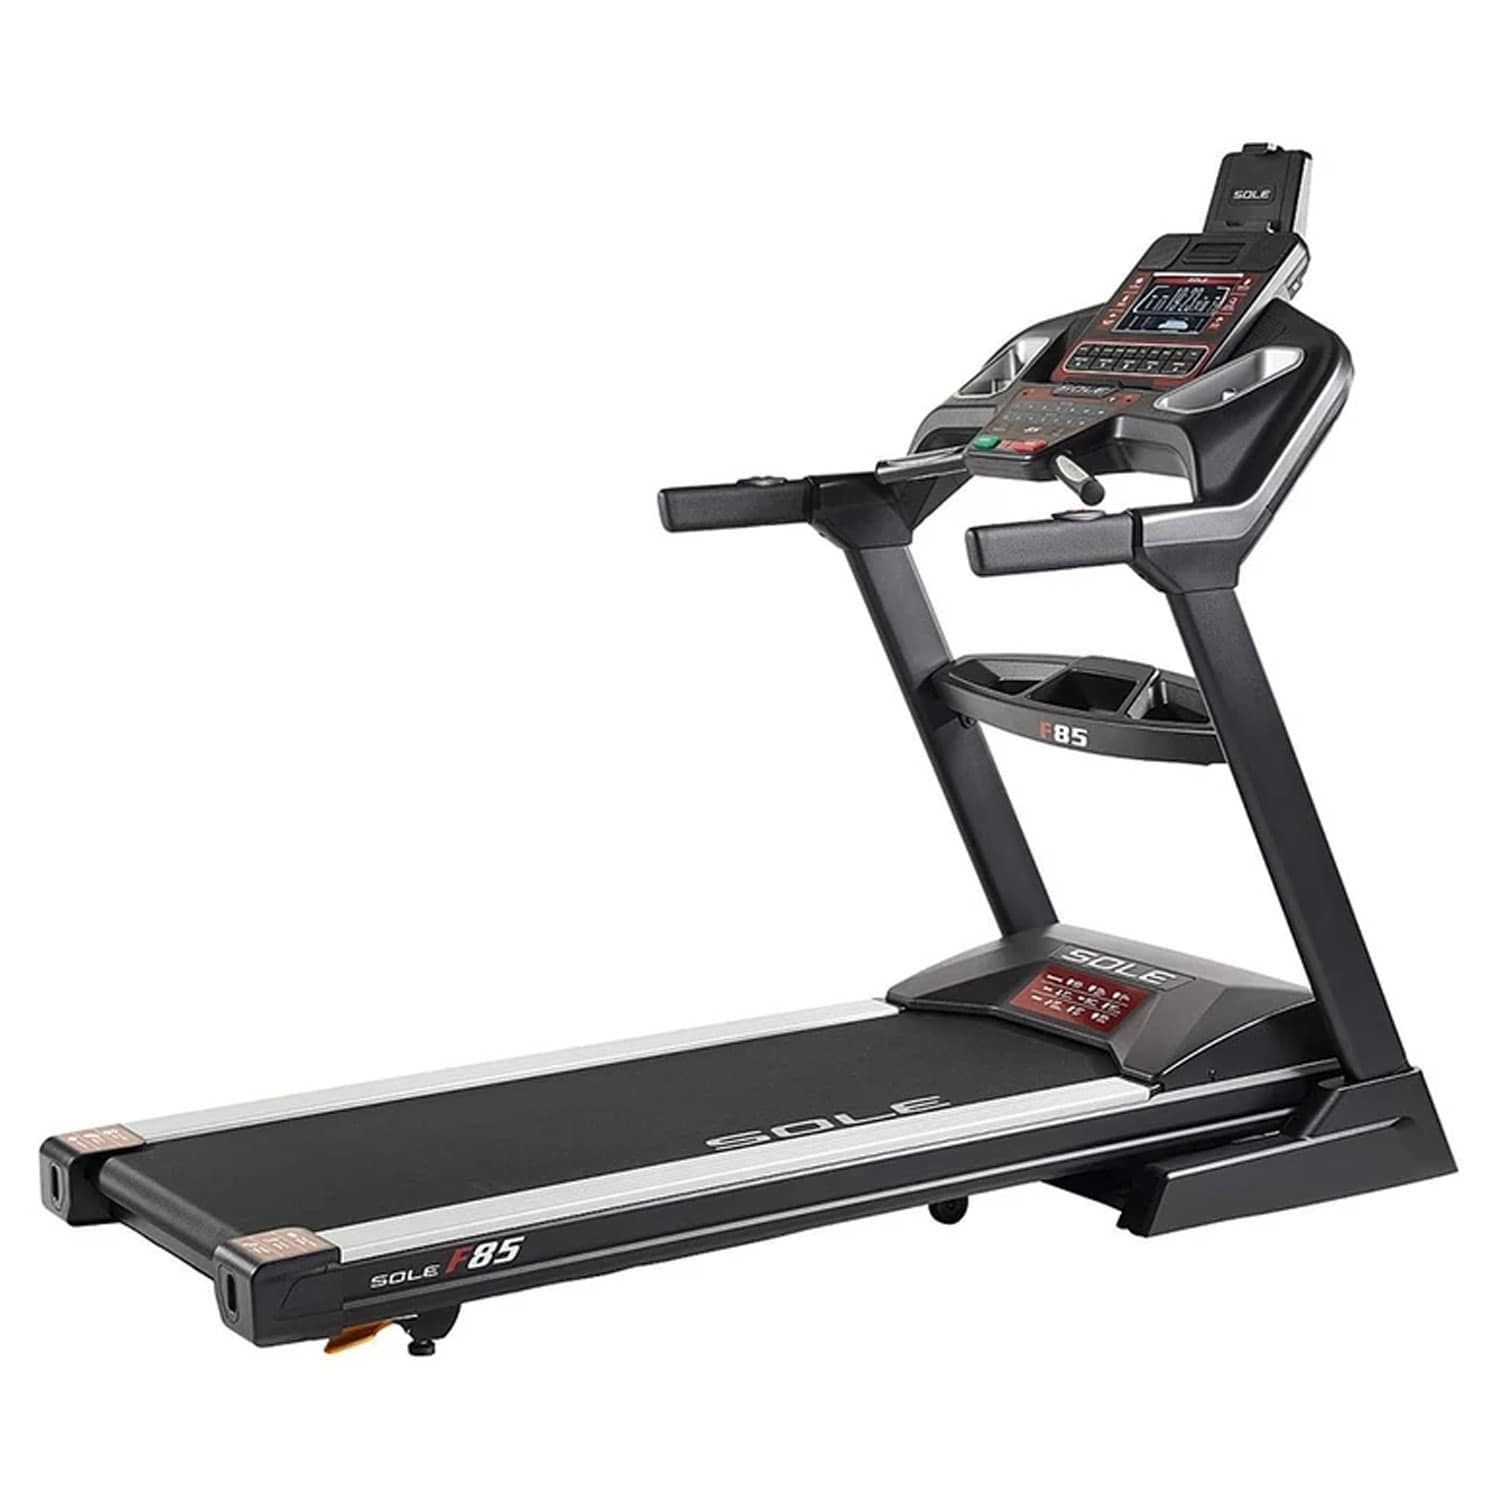 ARGT Sole Fitness F85 Home Use Treadmill